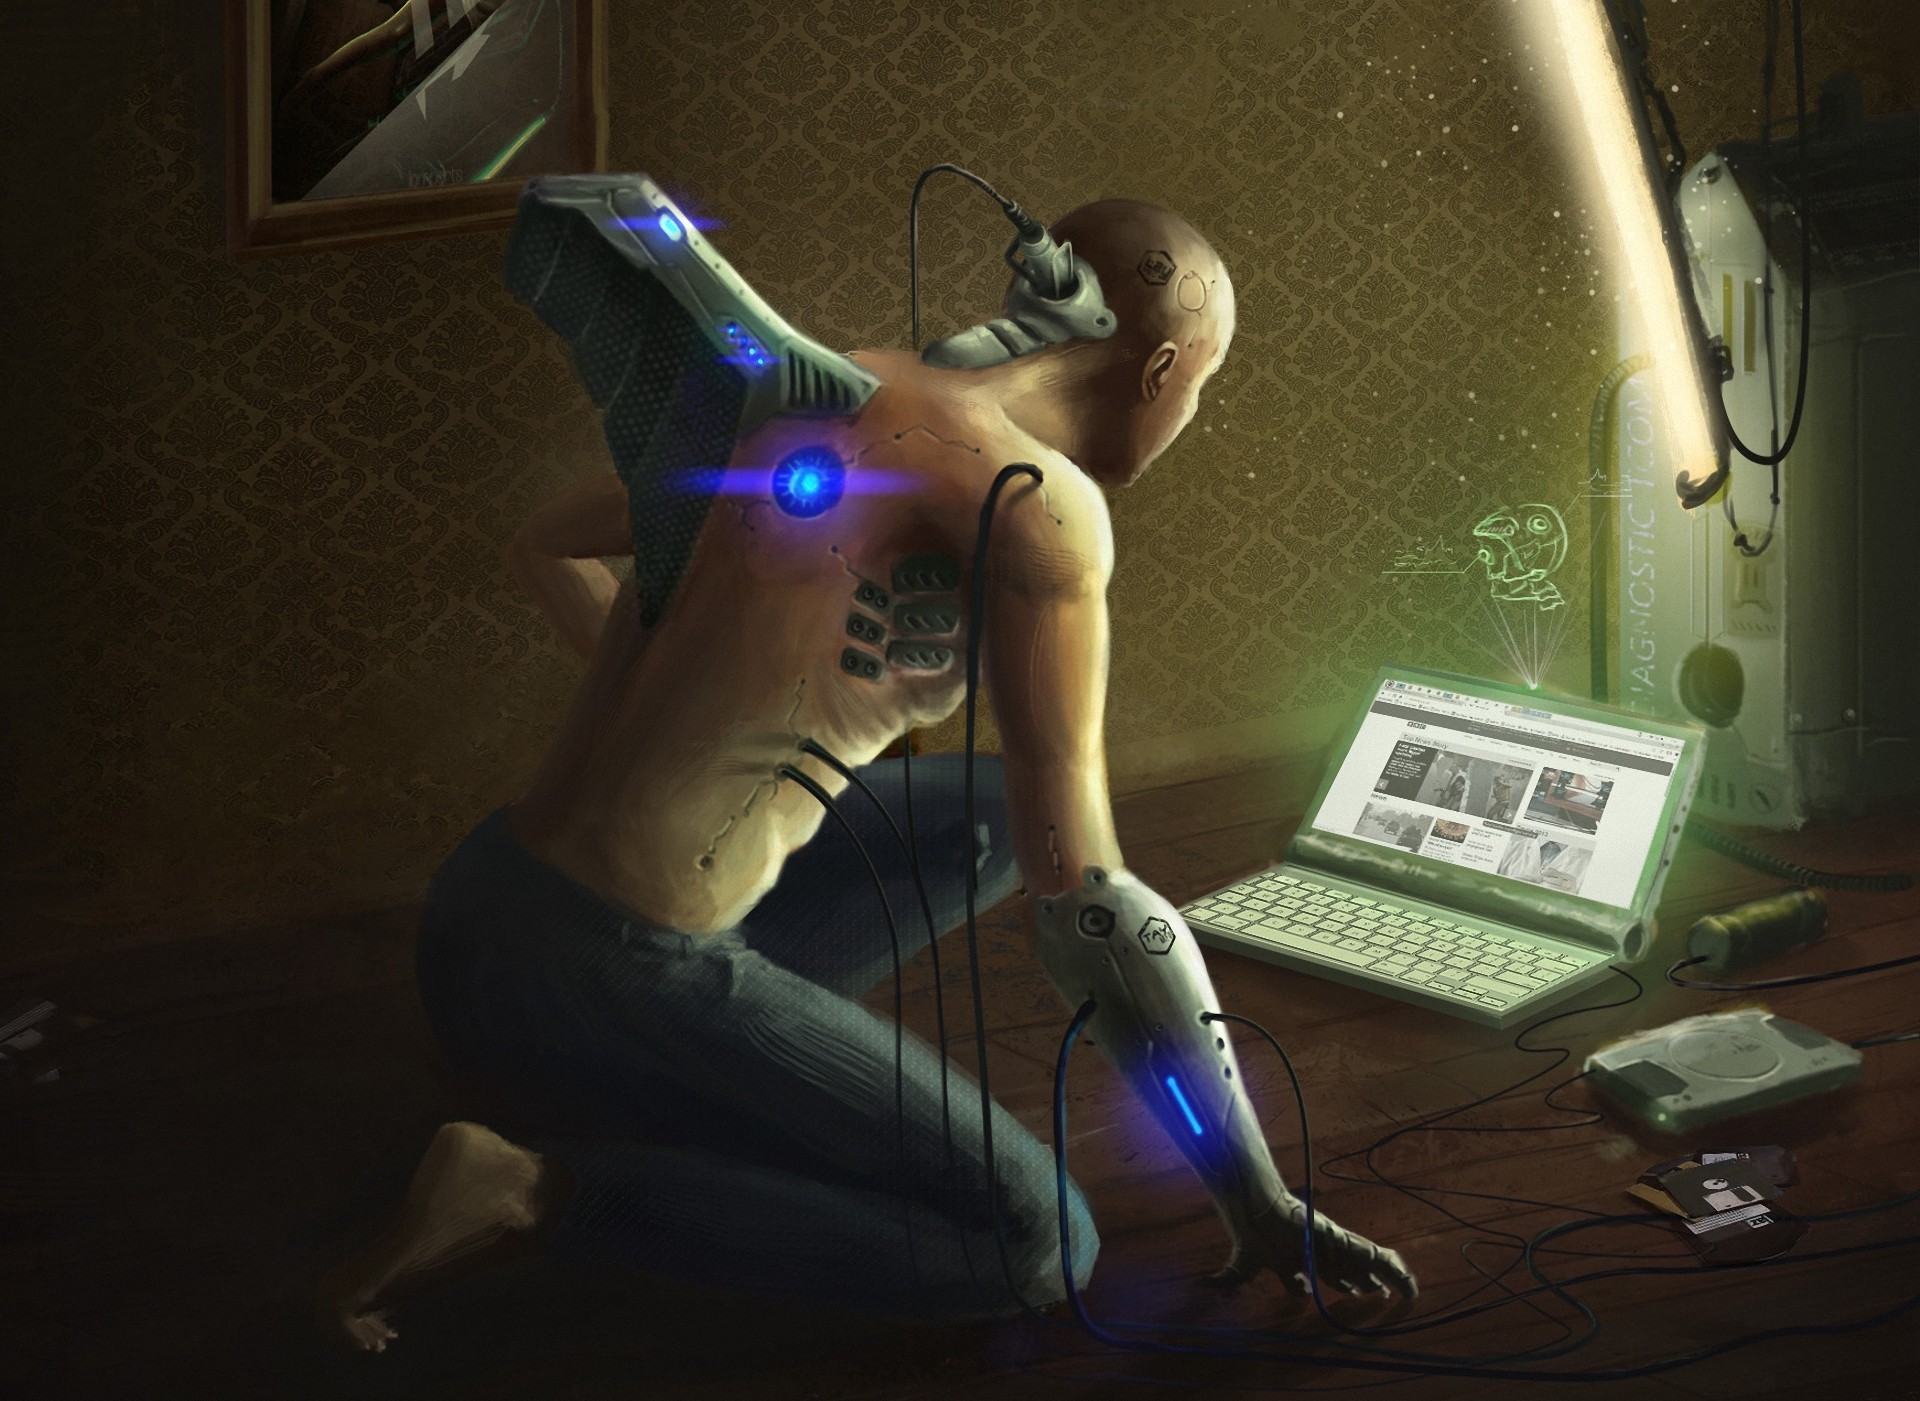 man, Android, Wires, Laptop, Floppy, Hard, Drive, Cyborg, Sci fi, Futuristic Wallpaper